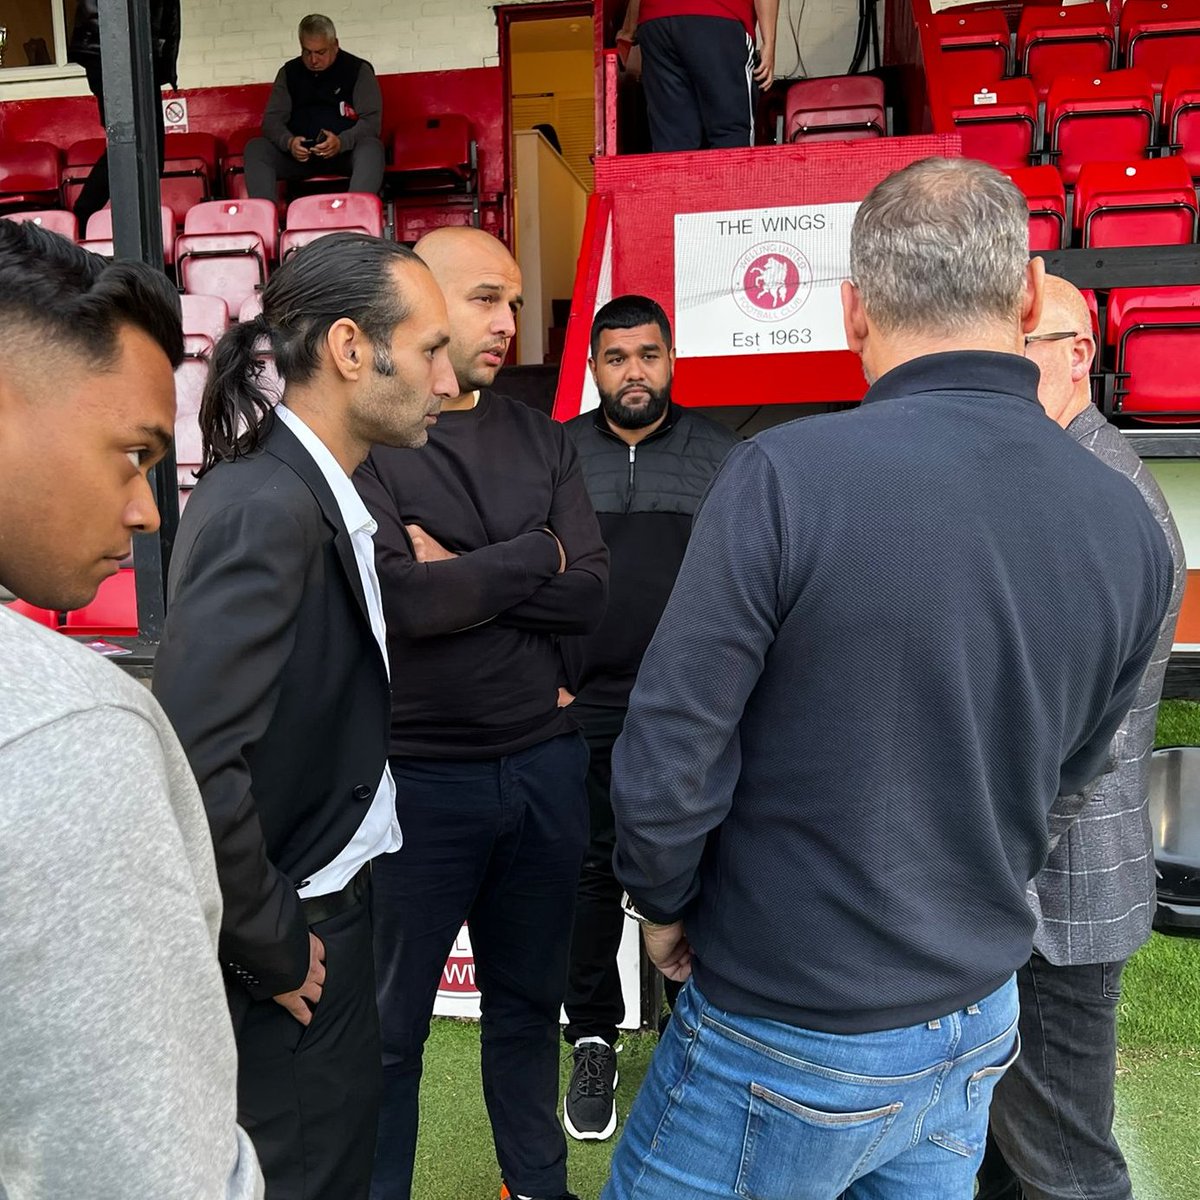 Exclusive: @WestHam academy graduate Anwar Uddin set to join the Football Association to spearhead diversity and inclusion work and make #FootballForAll ⚽️🏴󠁧󠁢󠁥󠁮󠁧󠁿🇧🇩🐯 skysports.com/football/news/… 👏